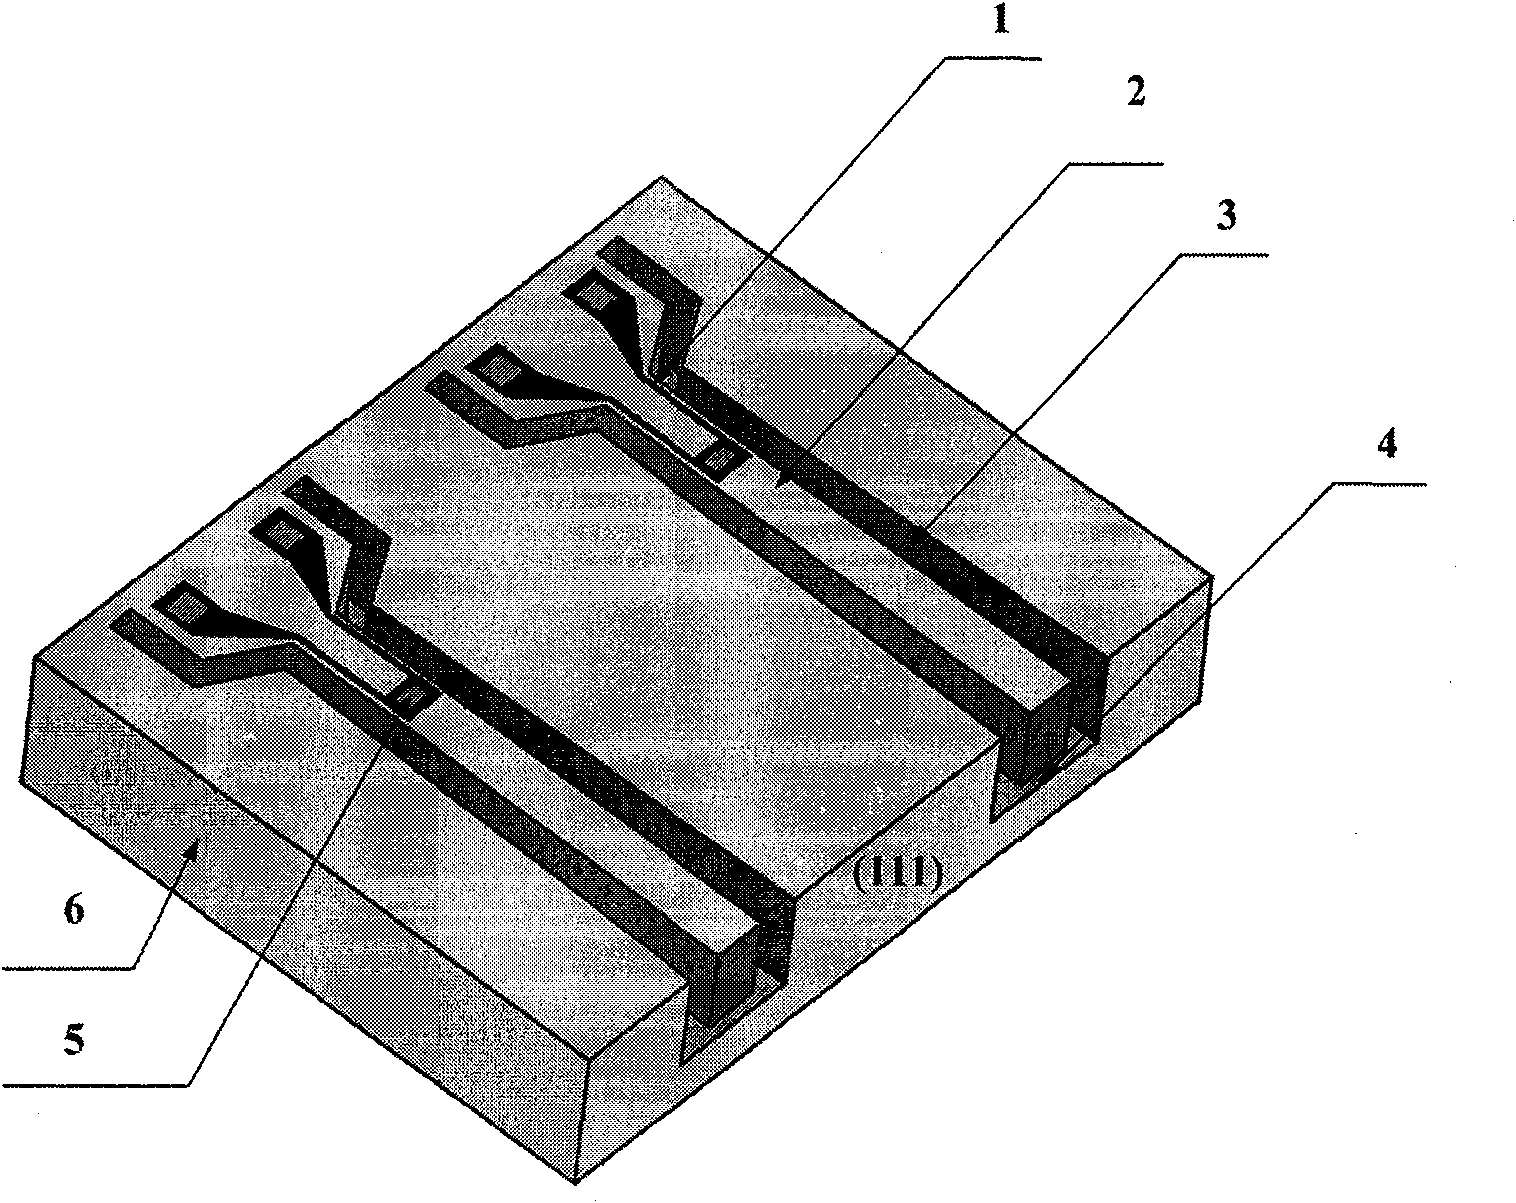 Cantilever beam acceleration transducer manufactured by micro-machining on single side of single silicon chip and method